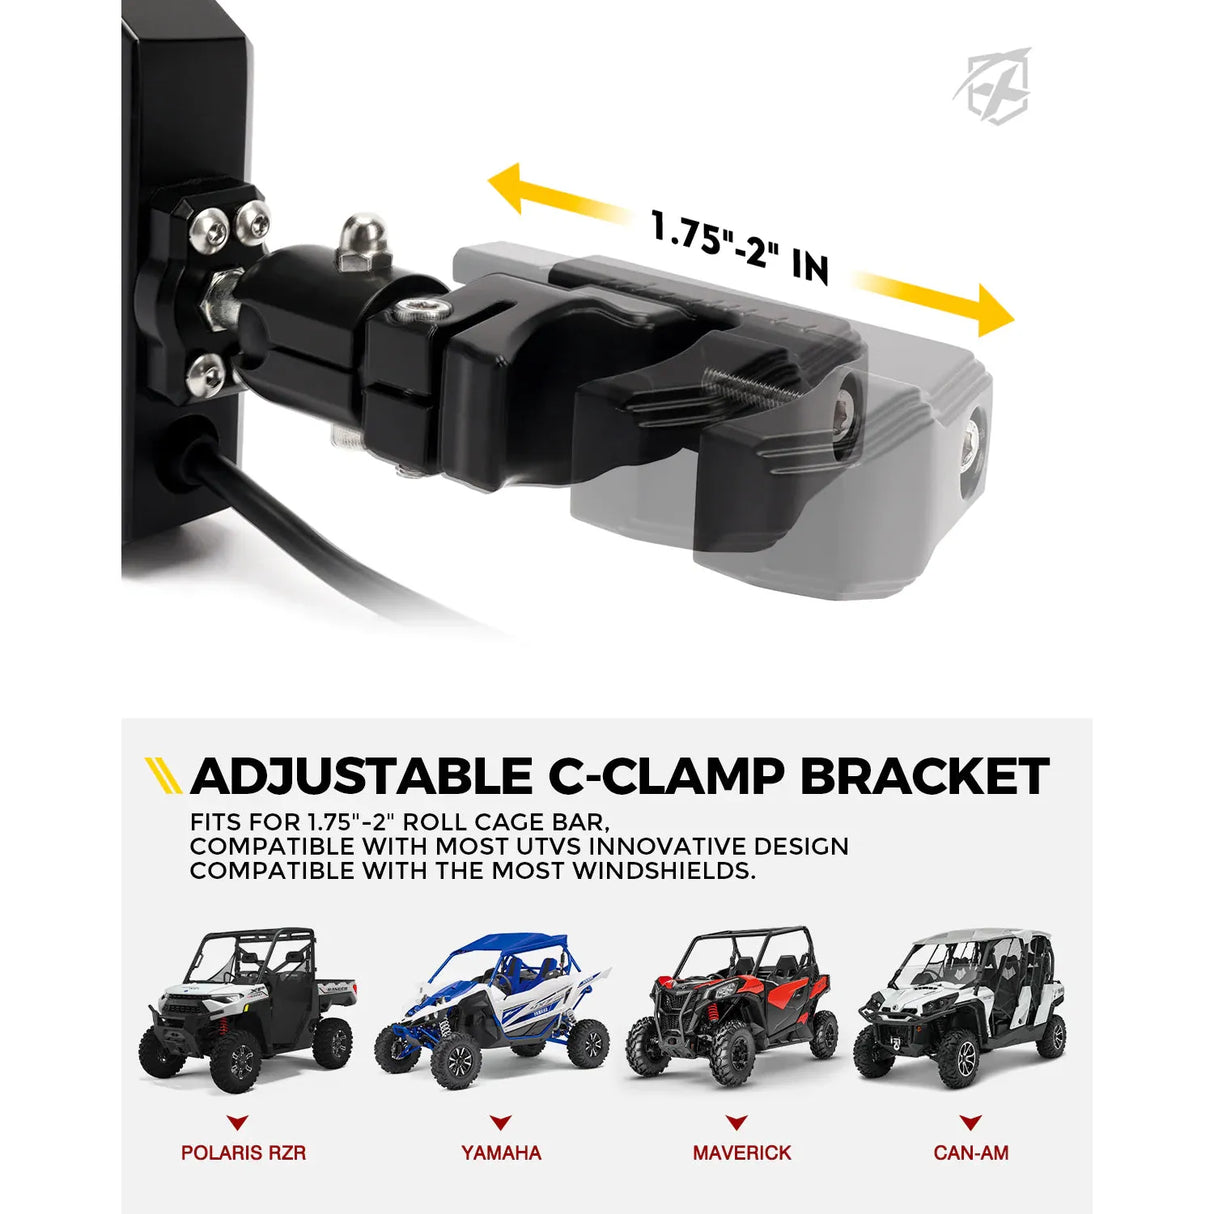 UTV Side Rear View Mirrors w/ LED Spot Light 1.75-2 Clamps for Can-Am  Polaris